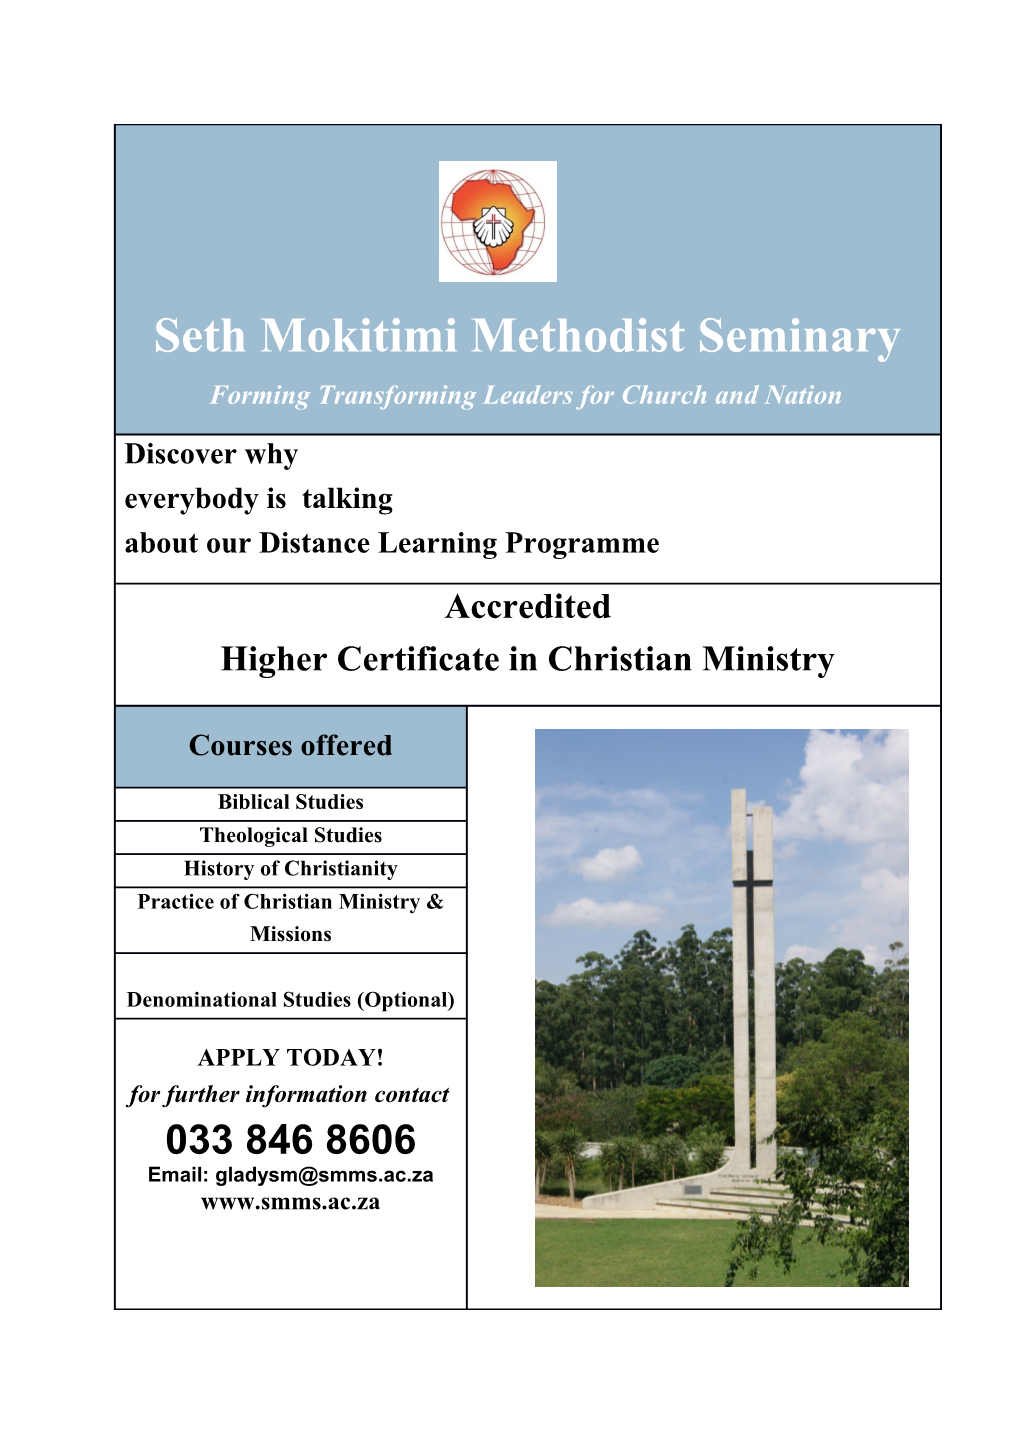 Higher Certificate in Christian Ministry (Hccm)